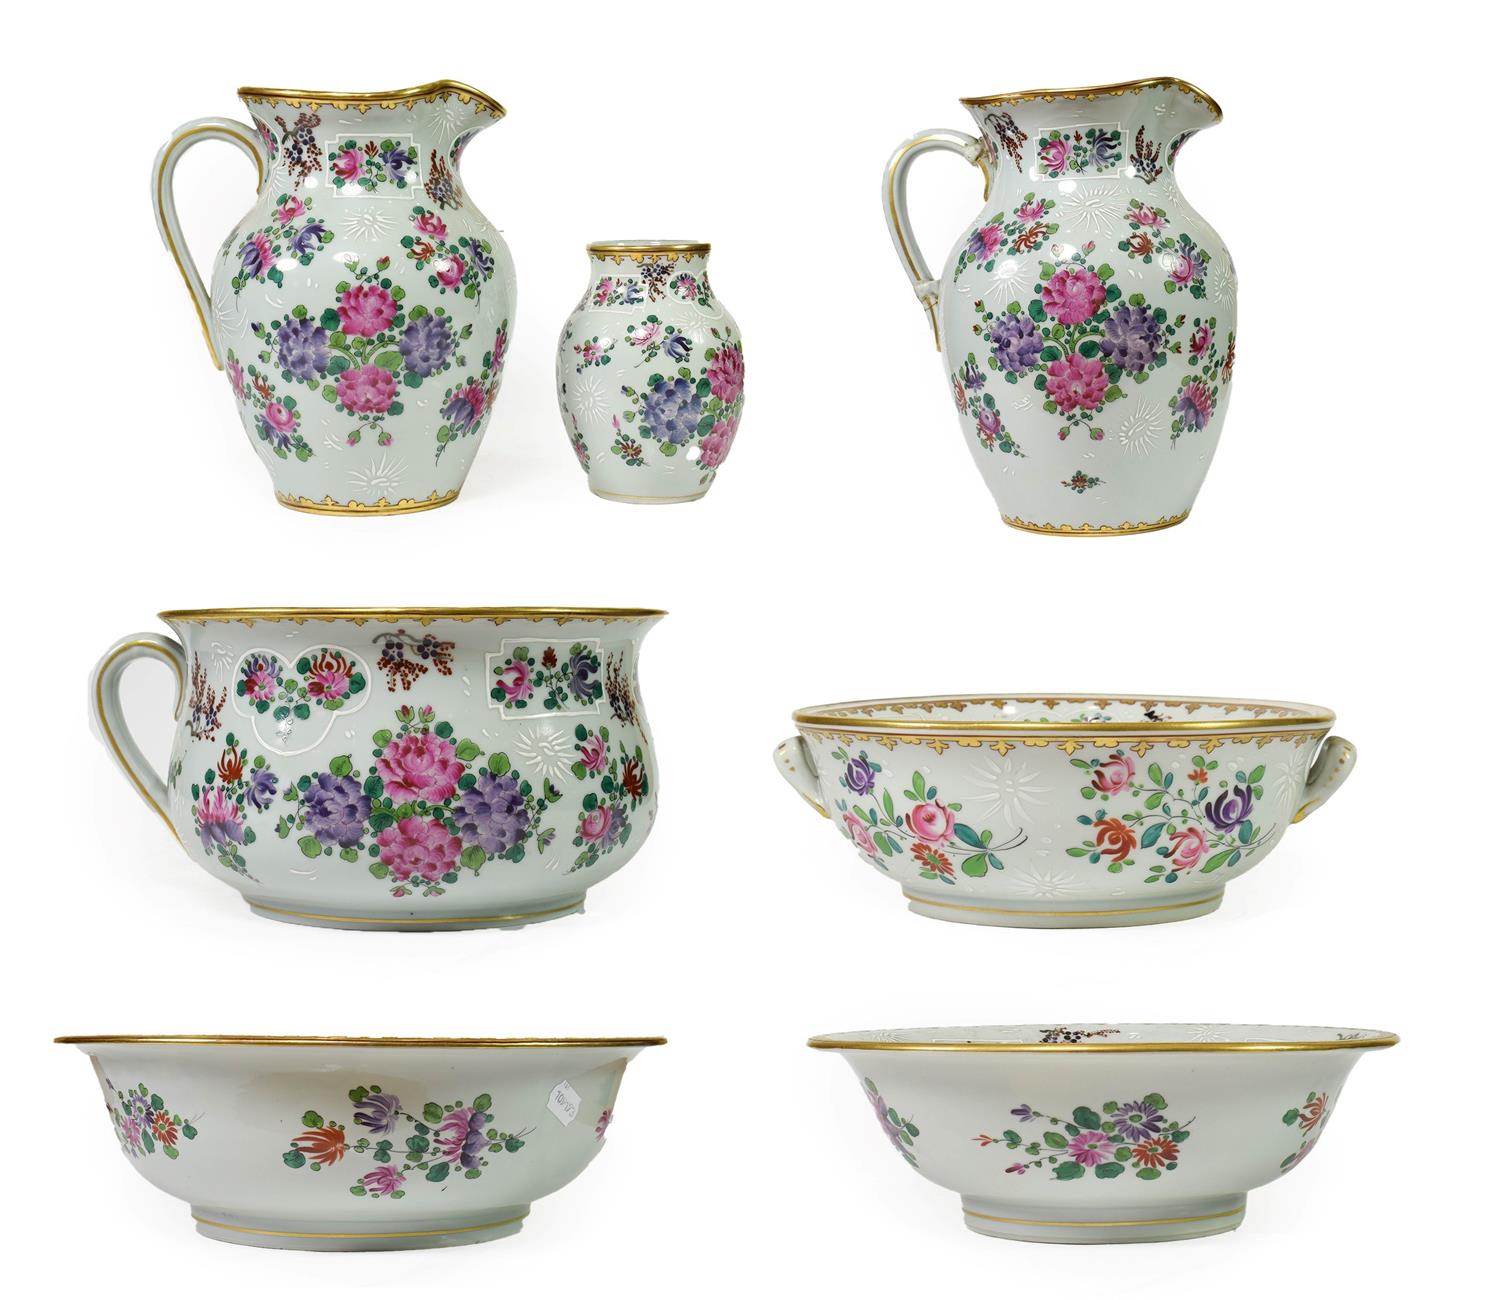 Lot 66 - ~ A Samson of Paris Porcelain Toilet Set, in Chinese Export style, painted in famille rose...